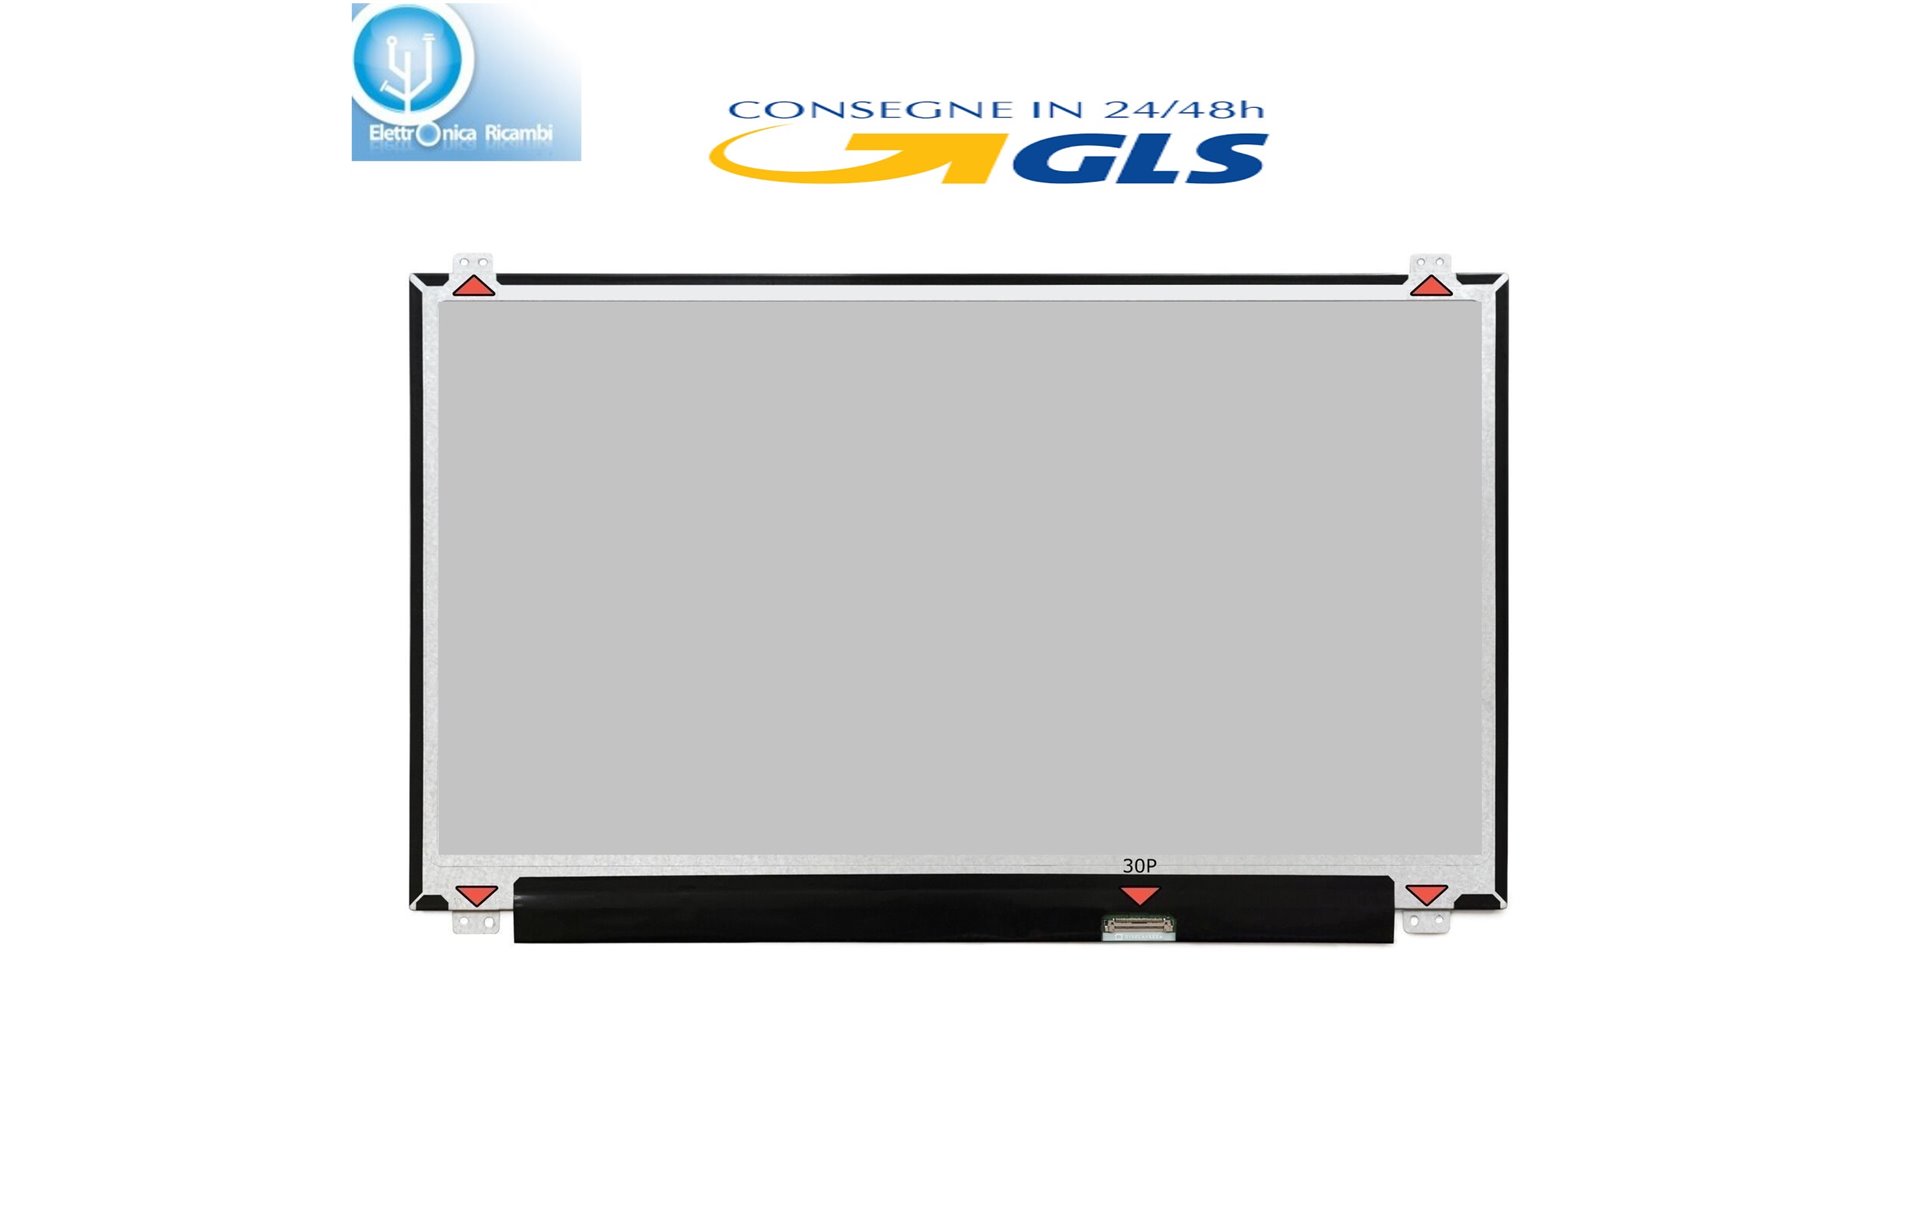 DISPLAY LCD  Acer ASPIRE TIMELINE ULTRA M3-MA50 SERIES 15.6 WideScreen (13.6"x7.6") LED"